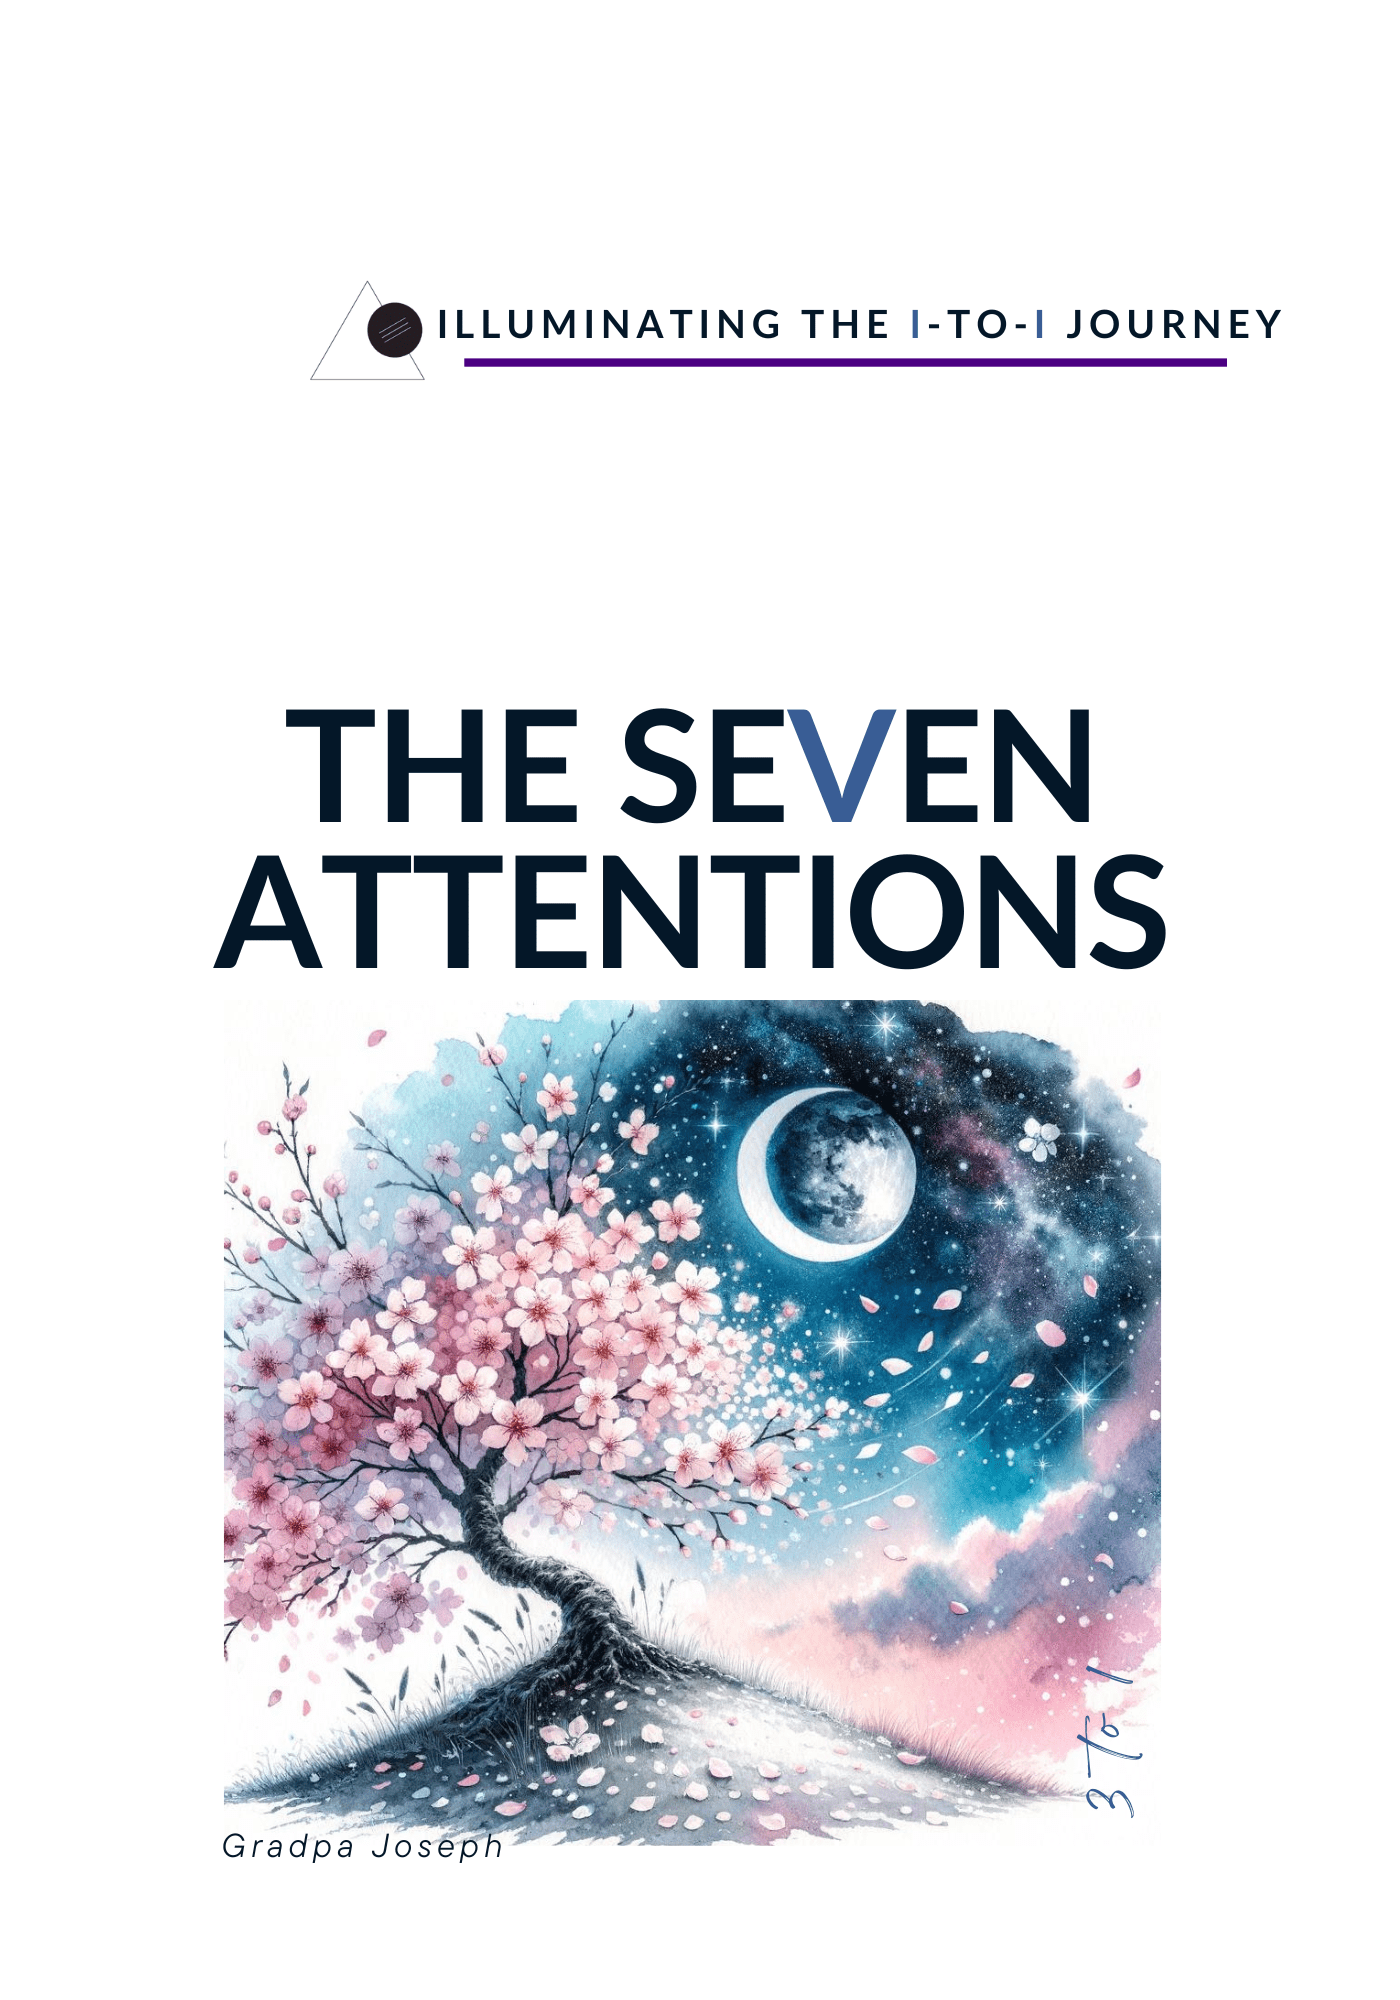 The seven attentions